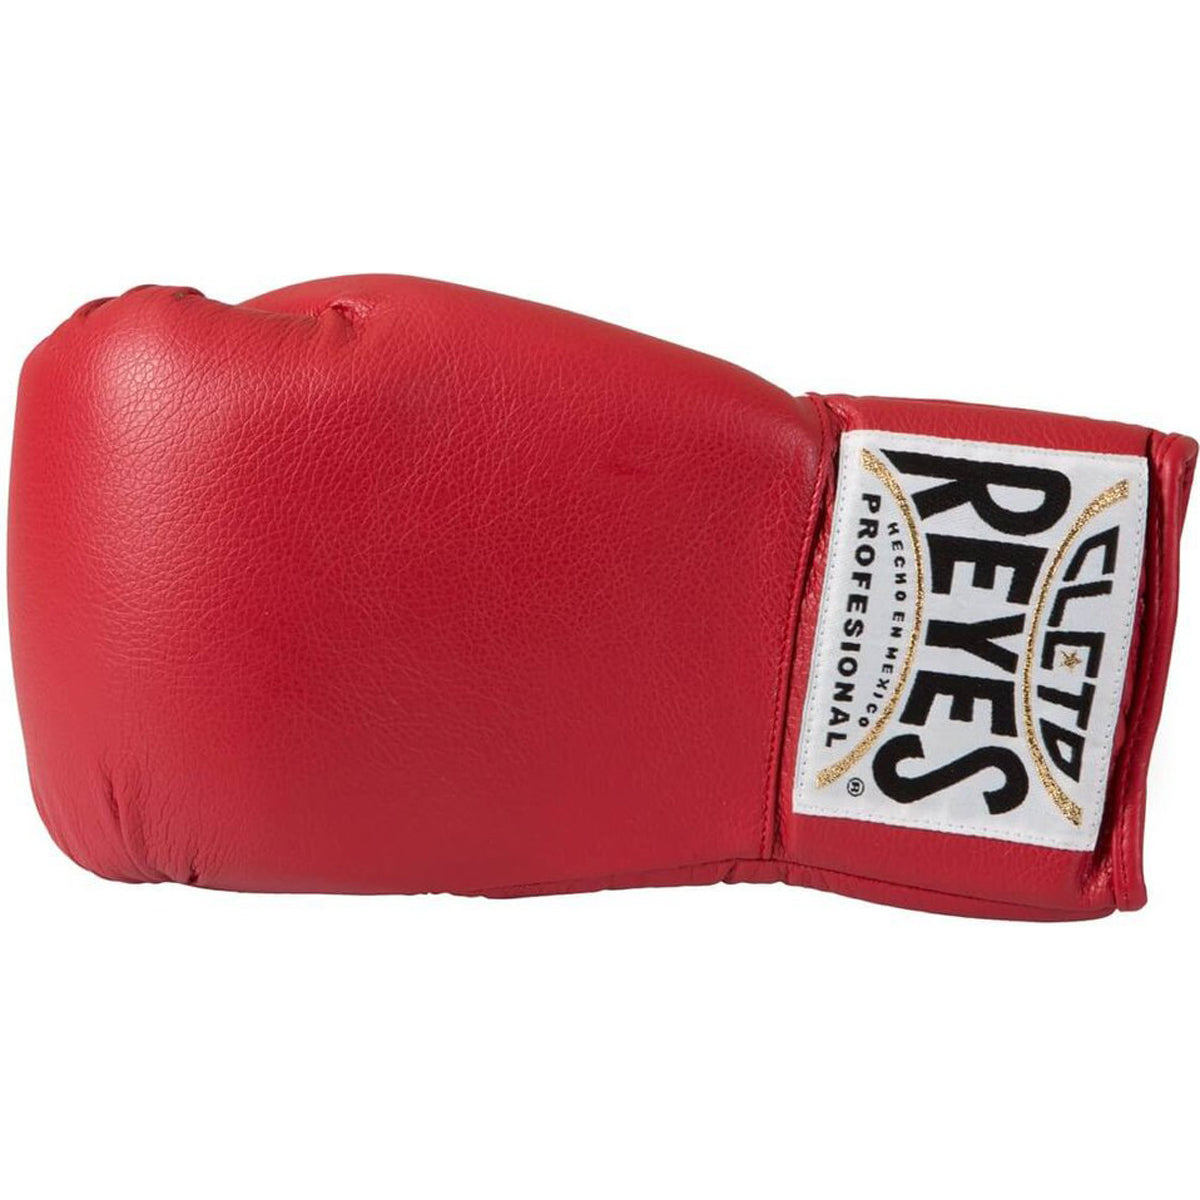 Cleto Reyes Standard Collectible Autograph Boxing Glove - White Cleto Reyes